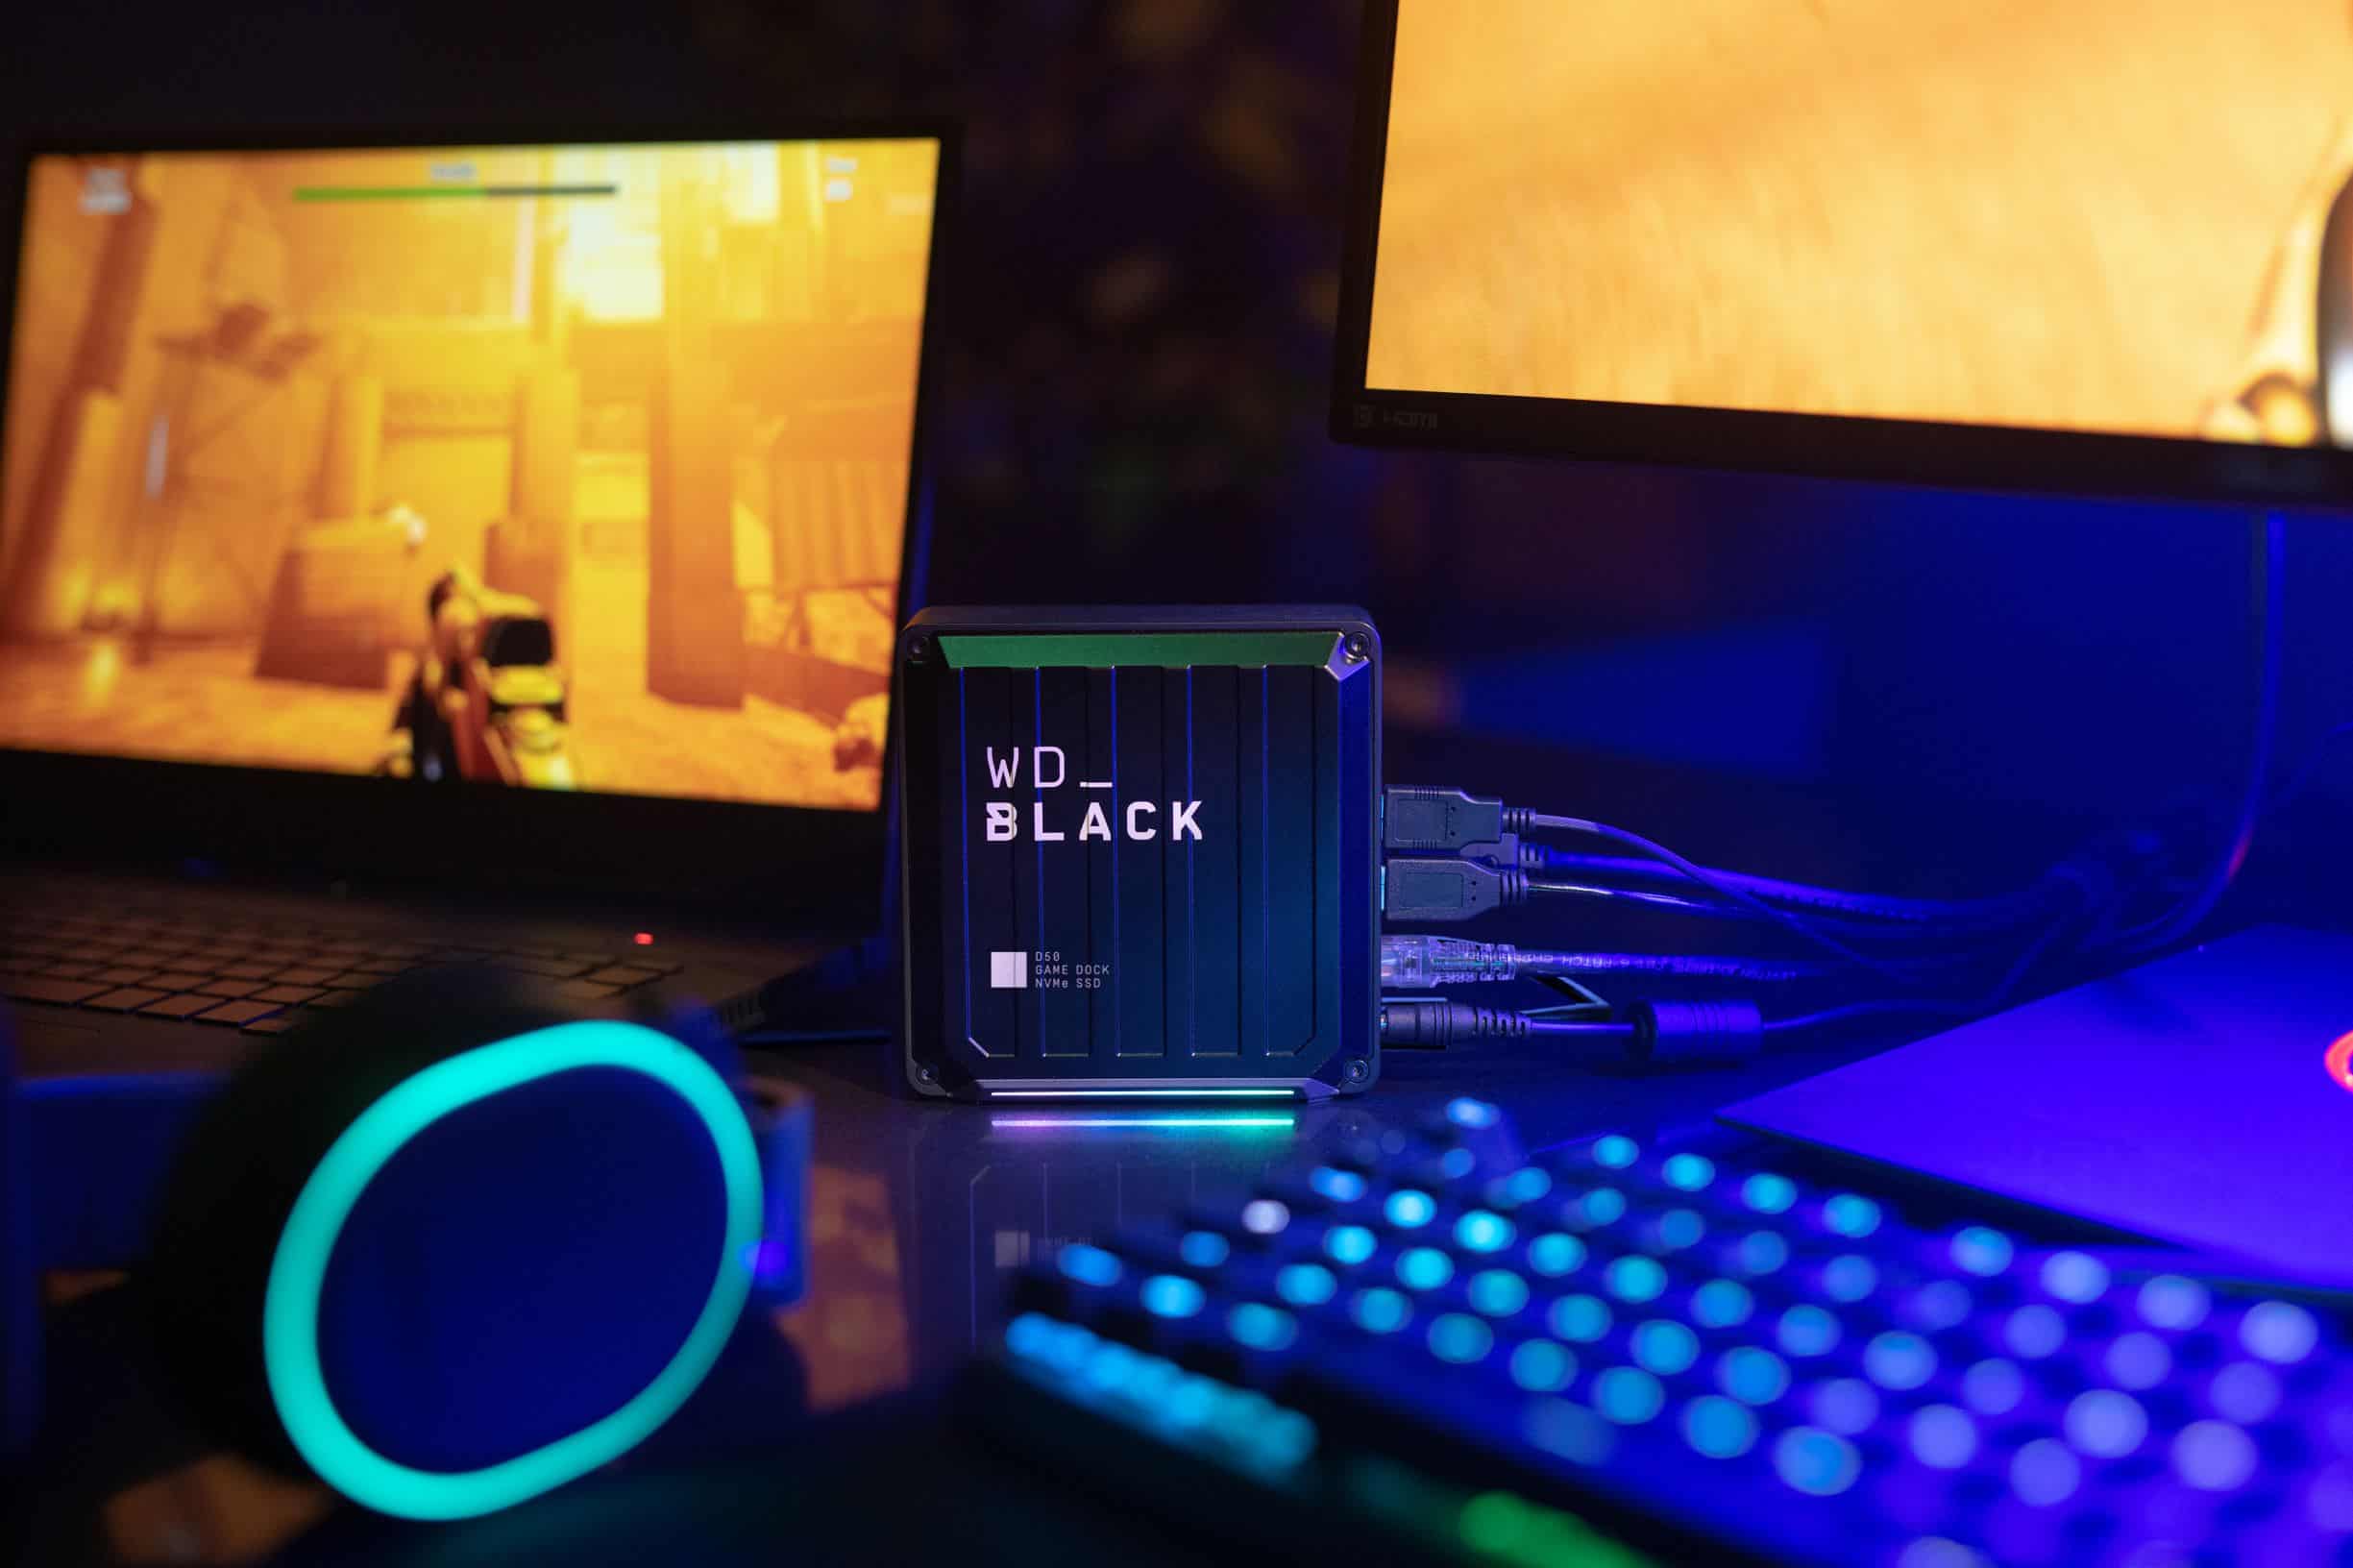 Western Digital announces an expanded WD_Black series to support Next-Gen gaming